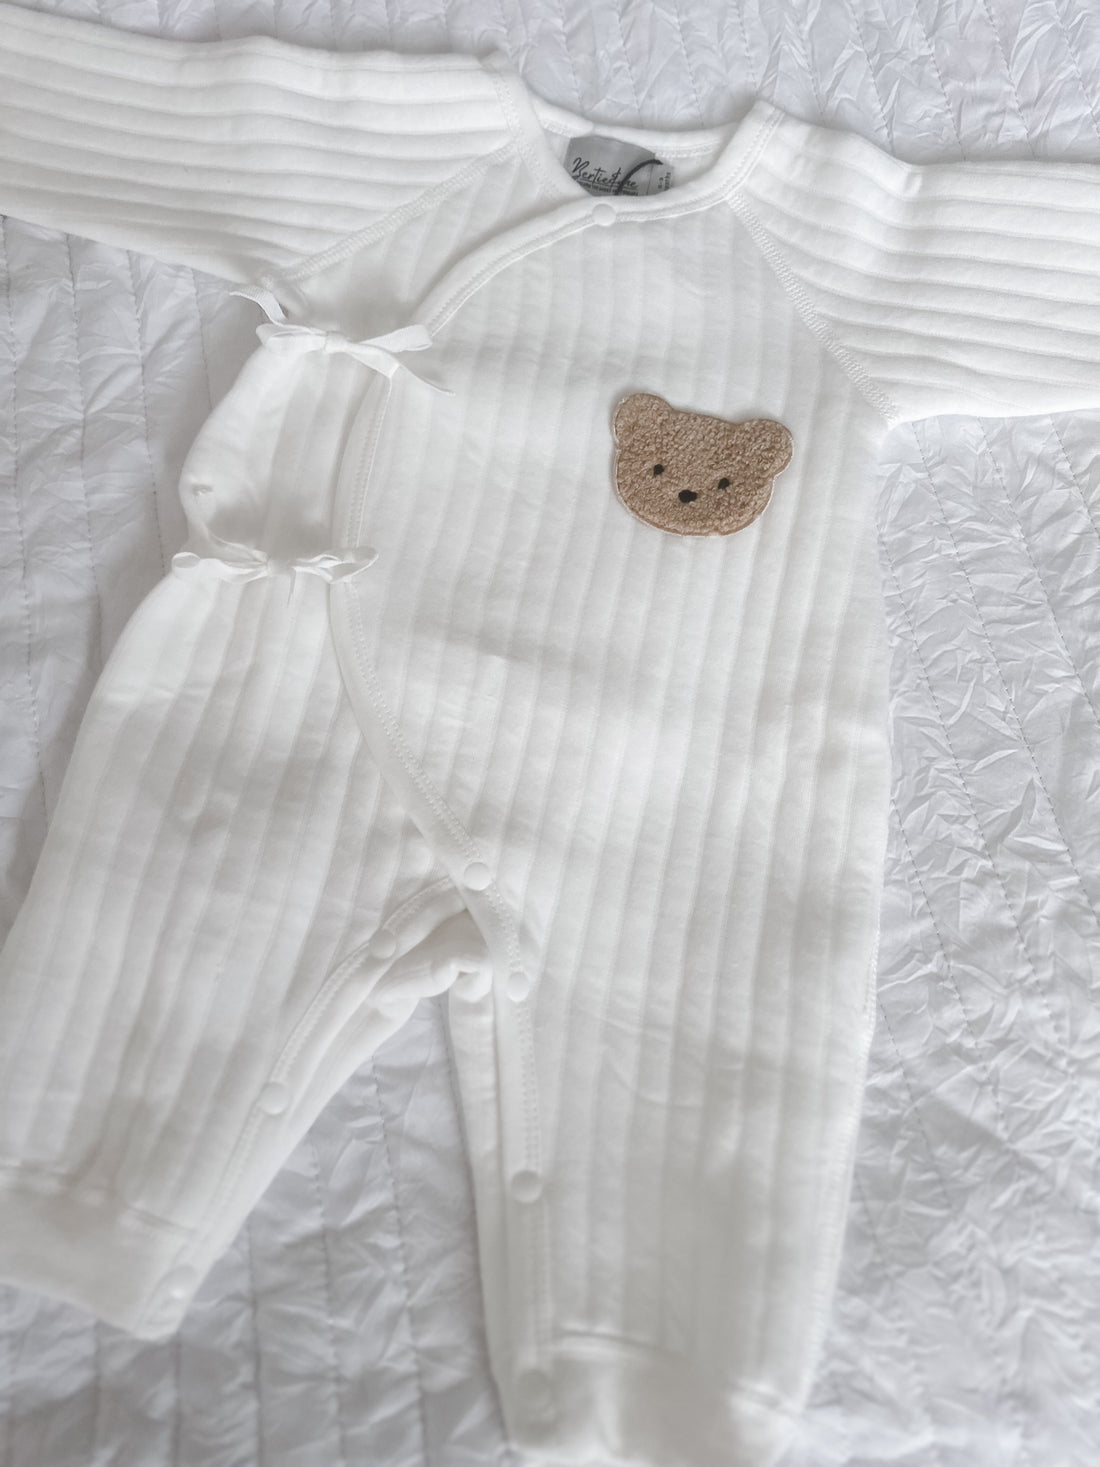 Winter teddy new baby outfit